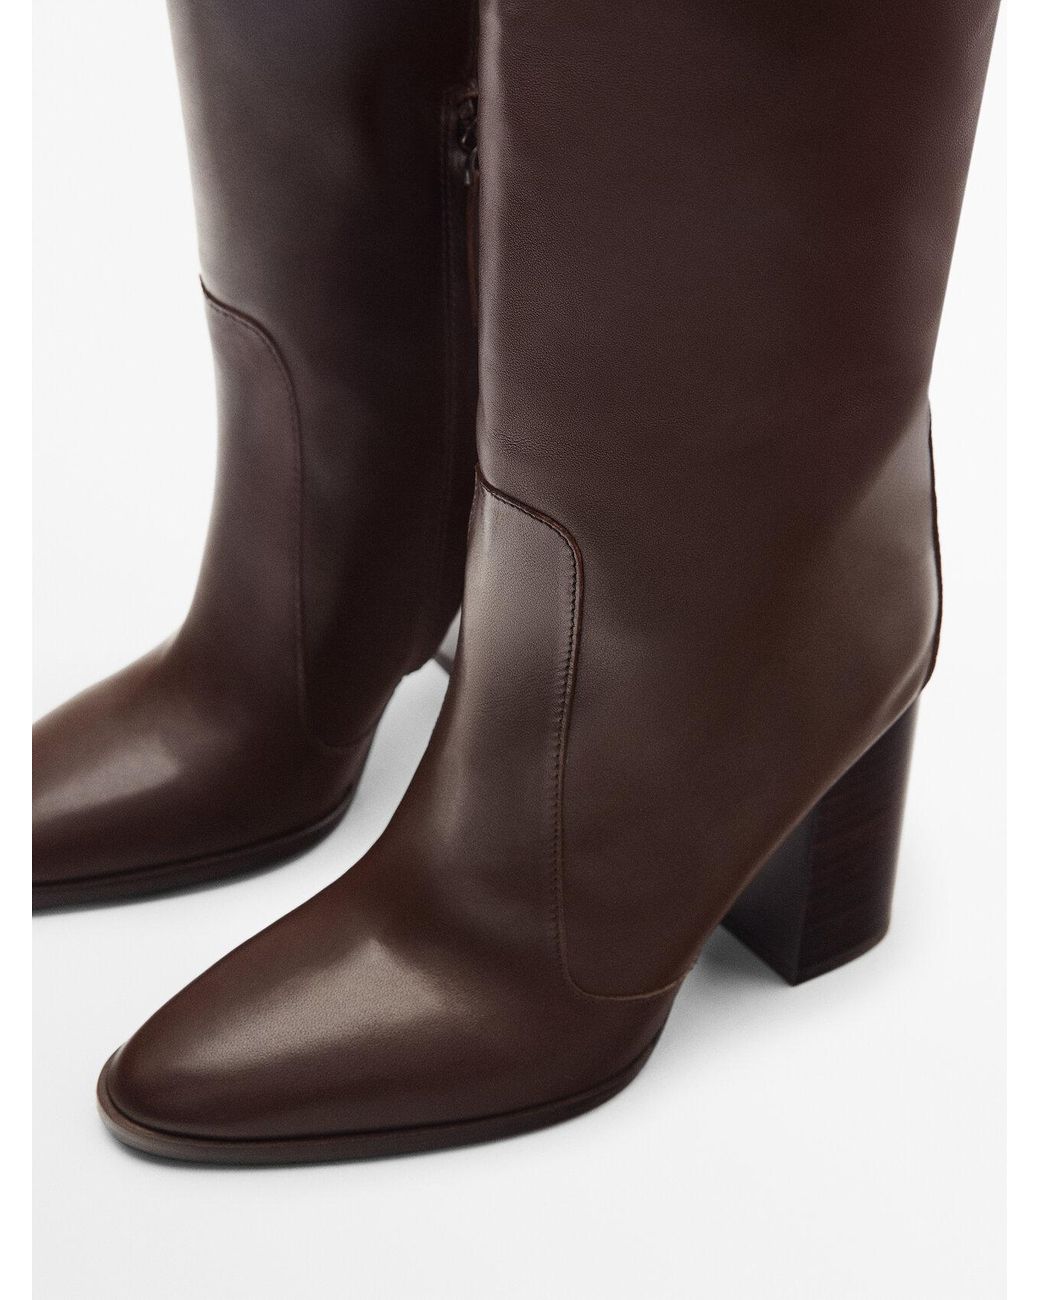 MASSIMO DUTTI Heeled Leather Boots in Brown